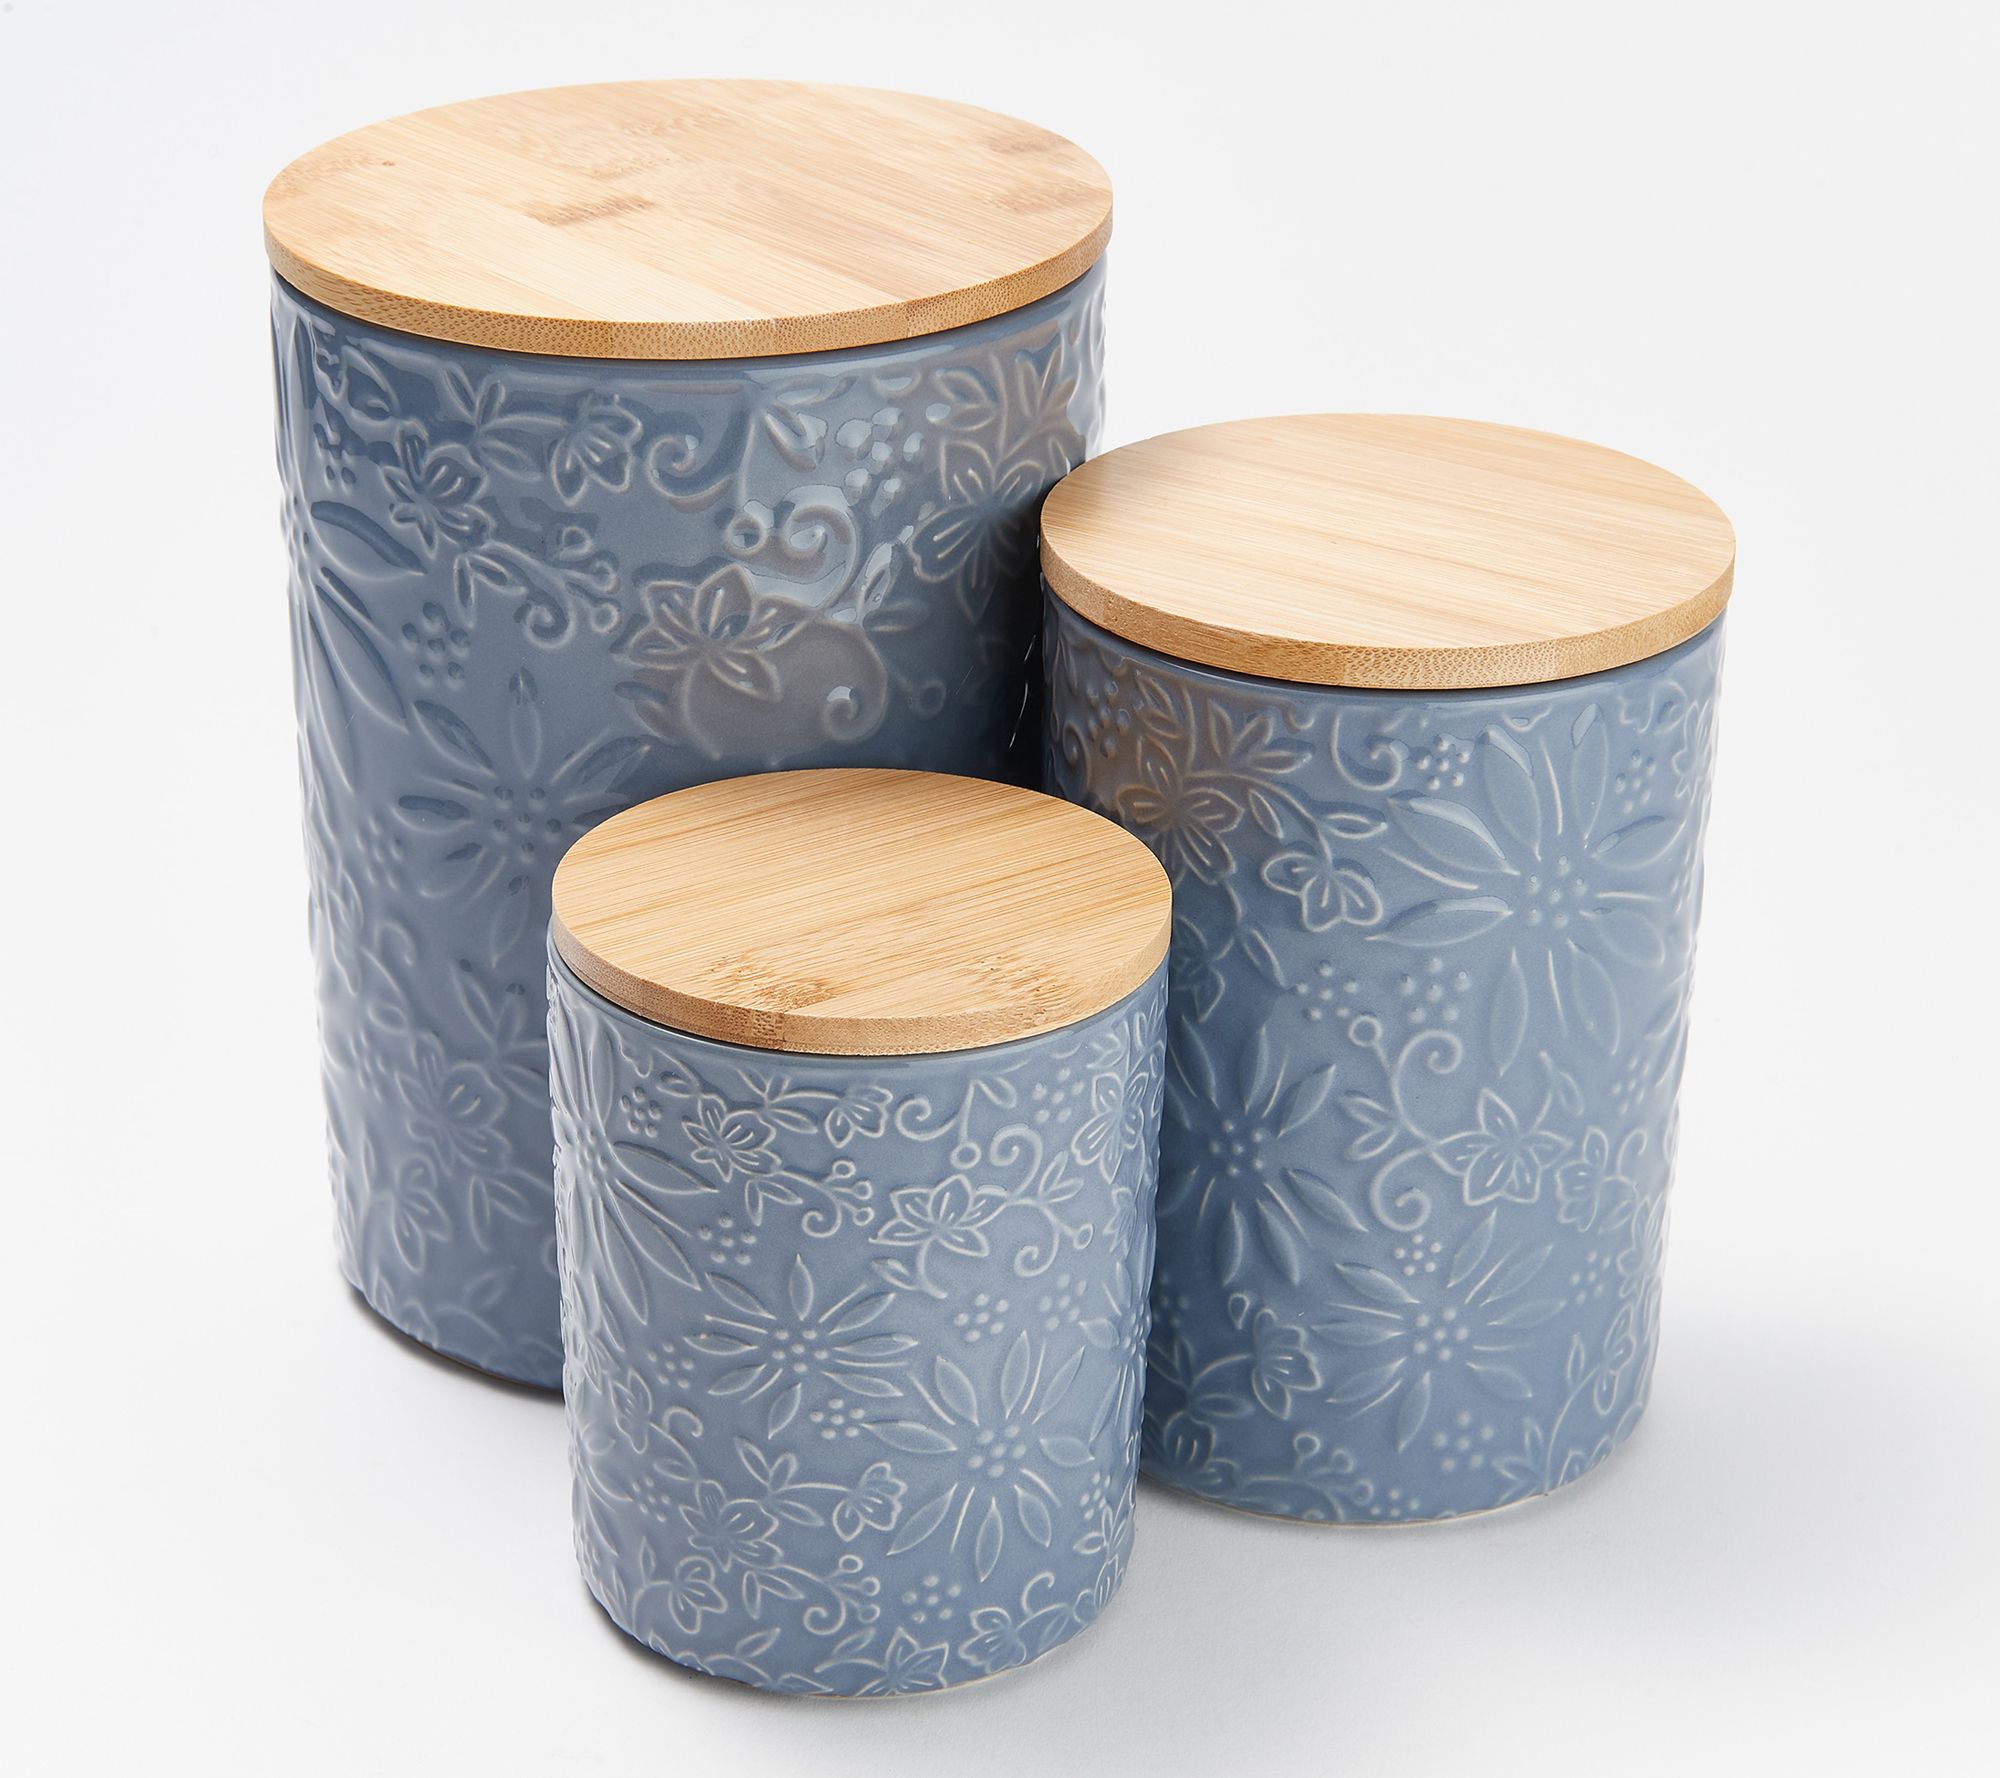 Blue and White Classic Ceramic Canisters, Set of 3